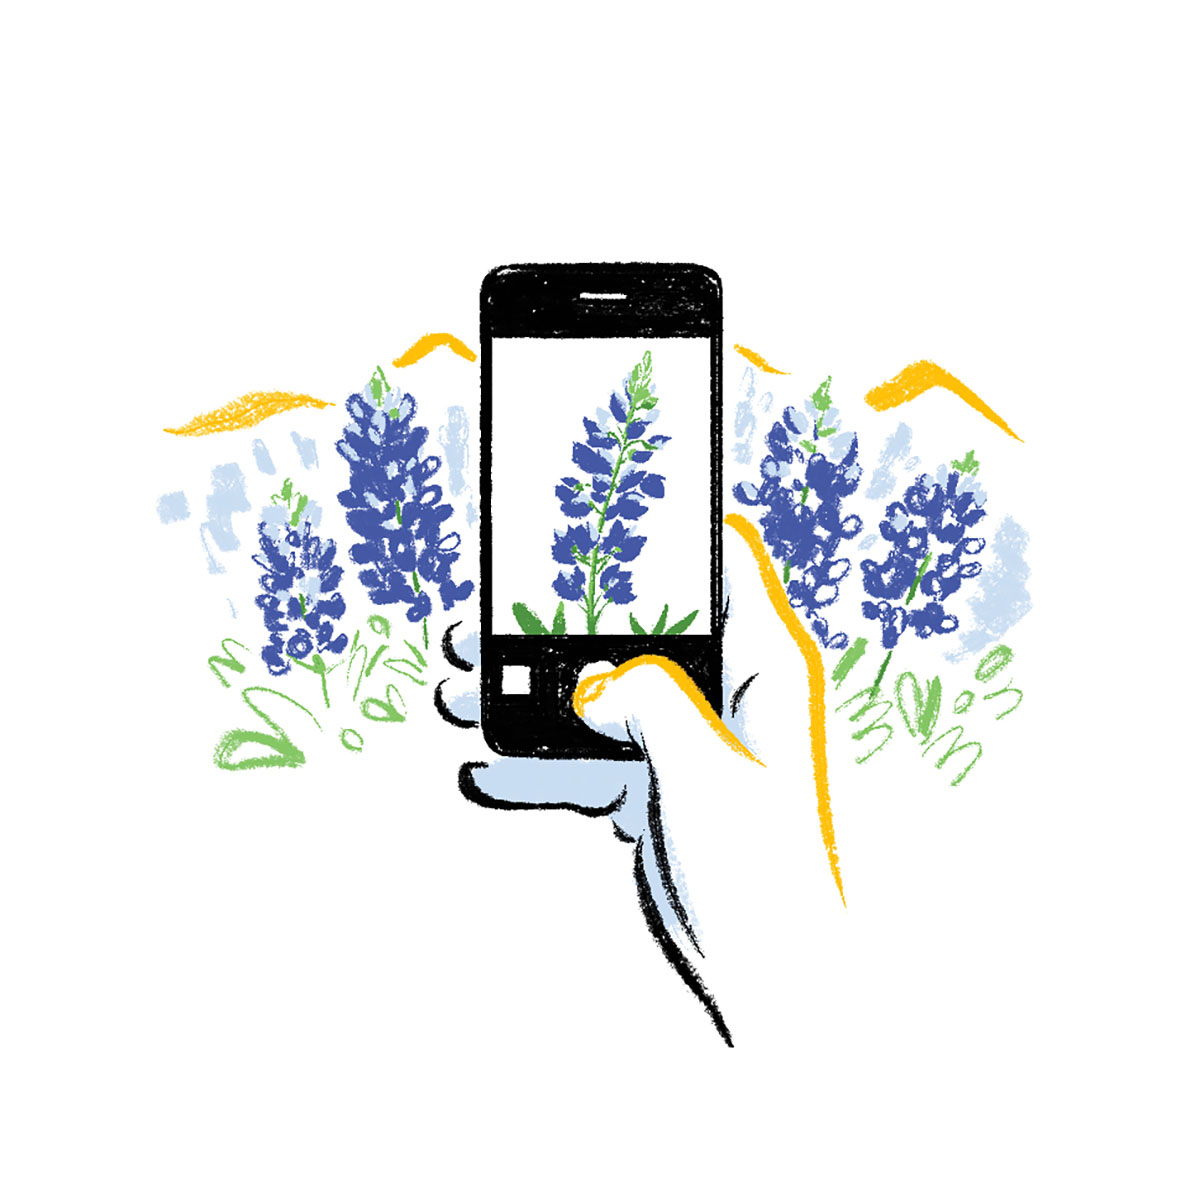 An illustration of a person photographing a bluebonnet with a phone